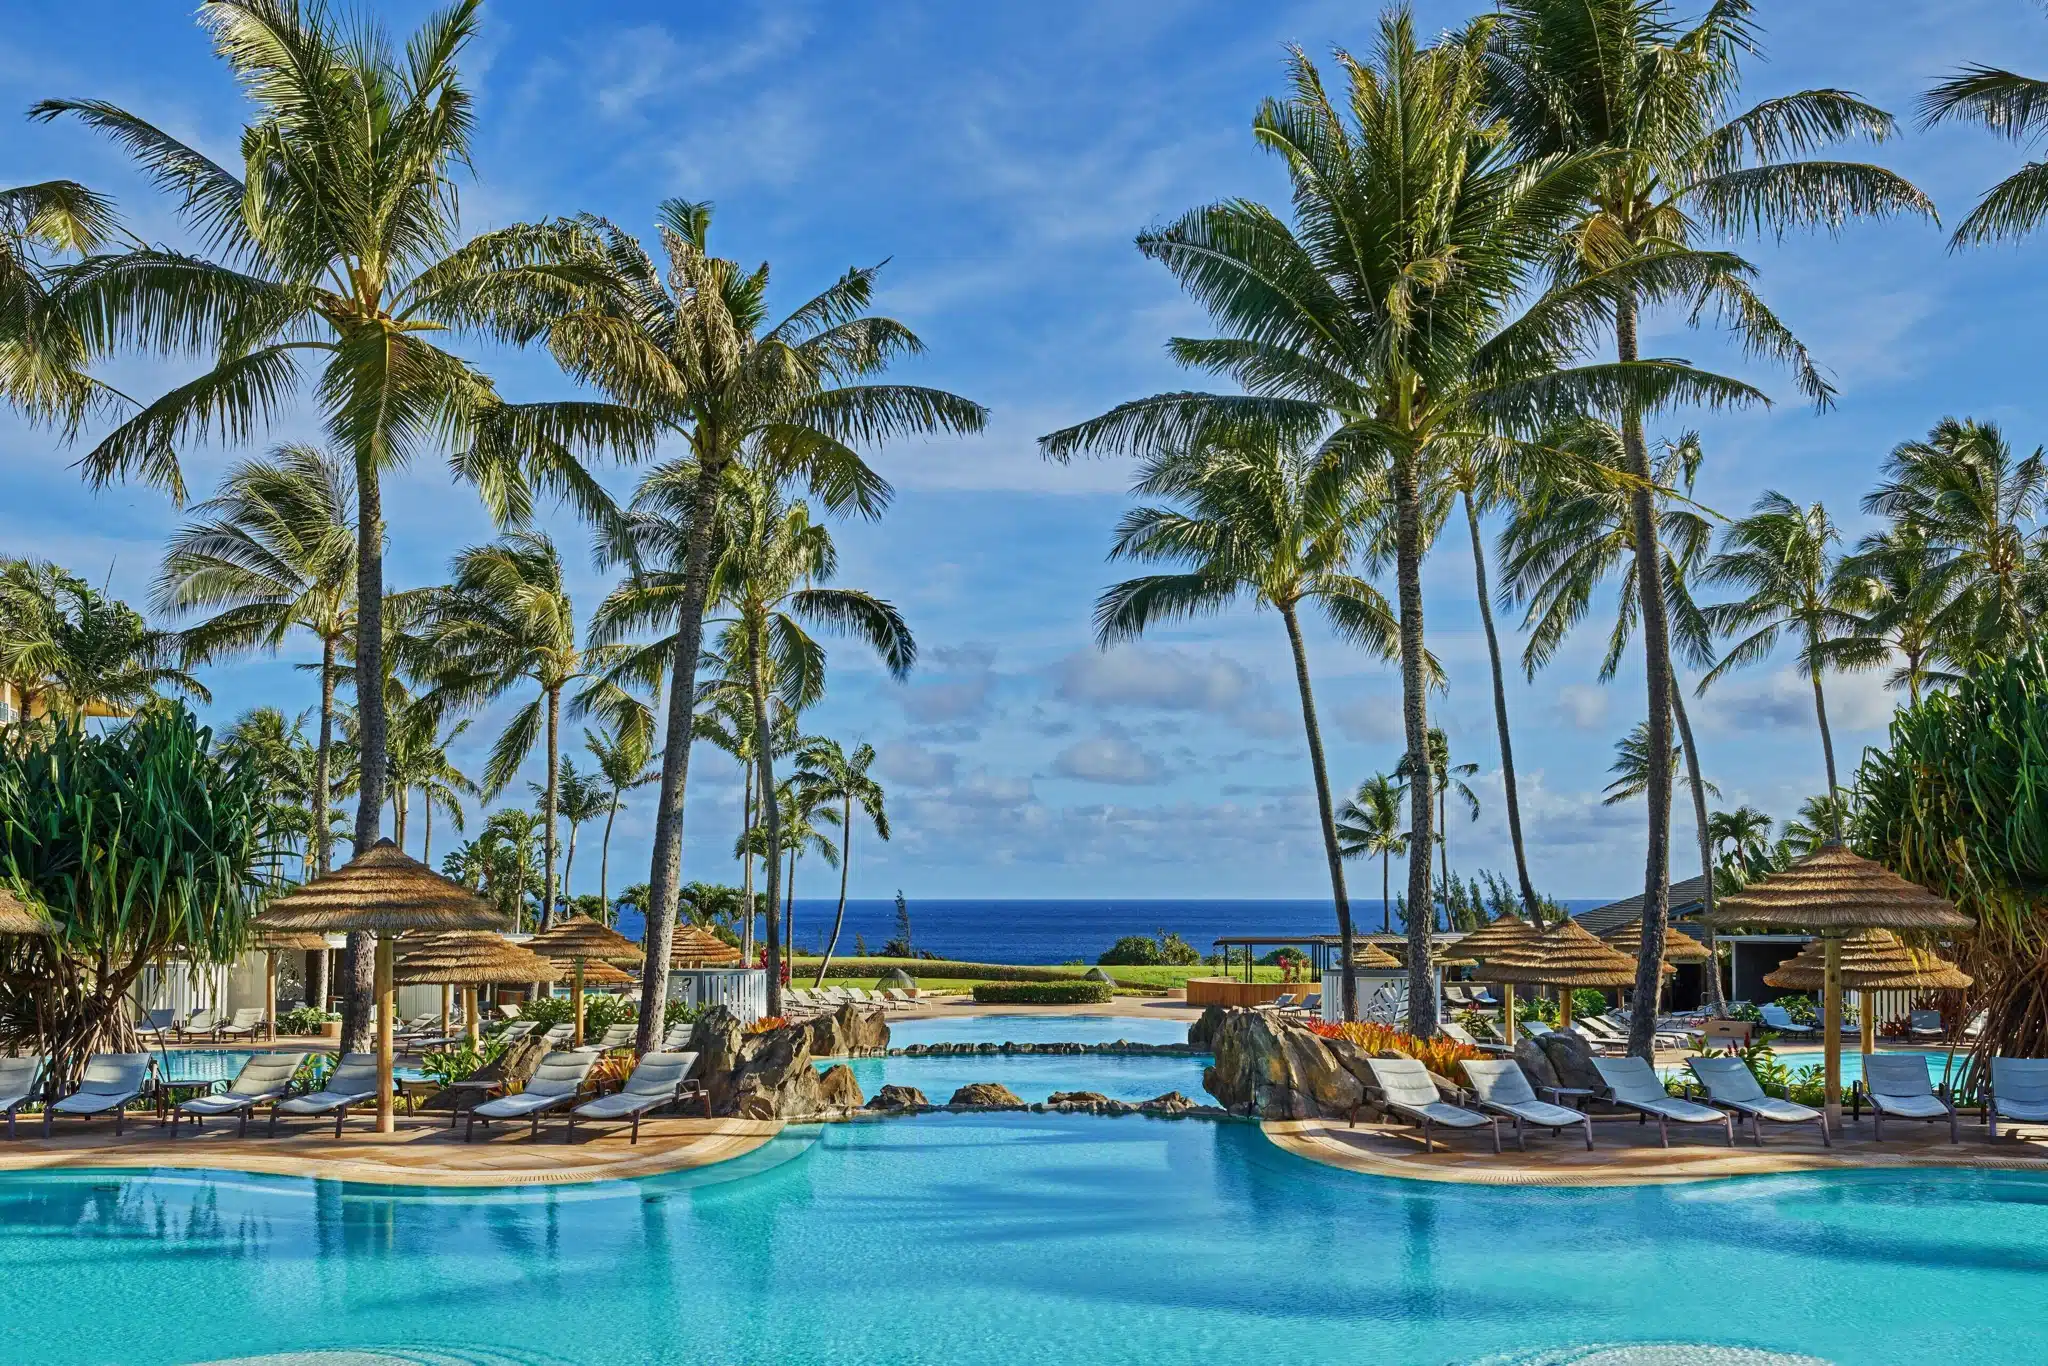 The Ritz-Carlton Maui is a Hotel located in the city of Lahaina on Maui, Hawaii